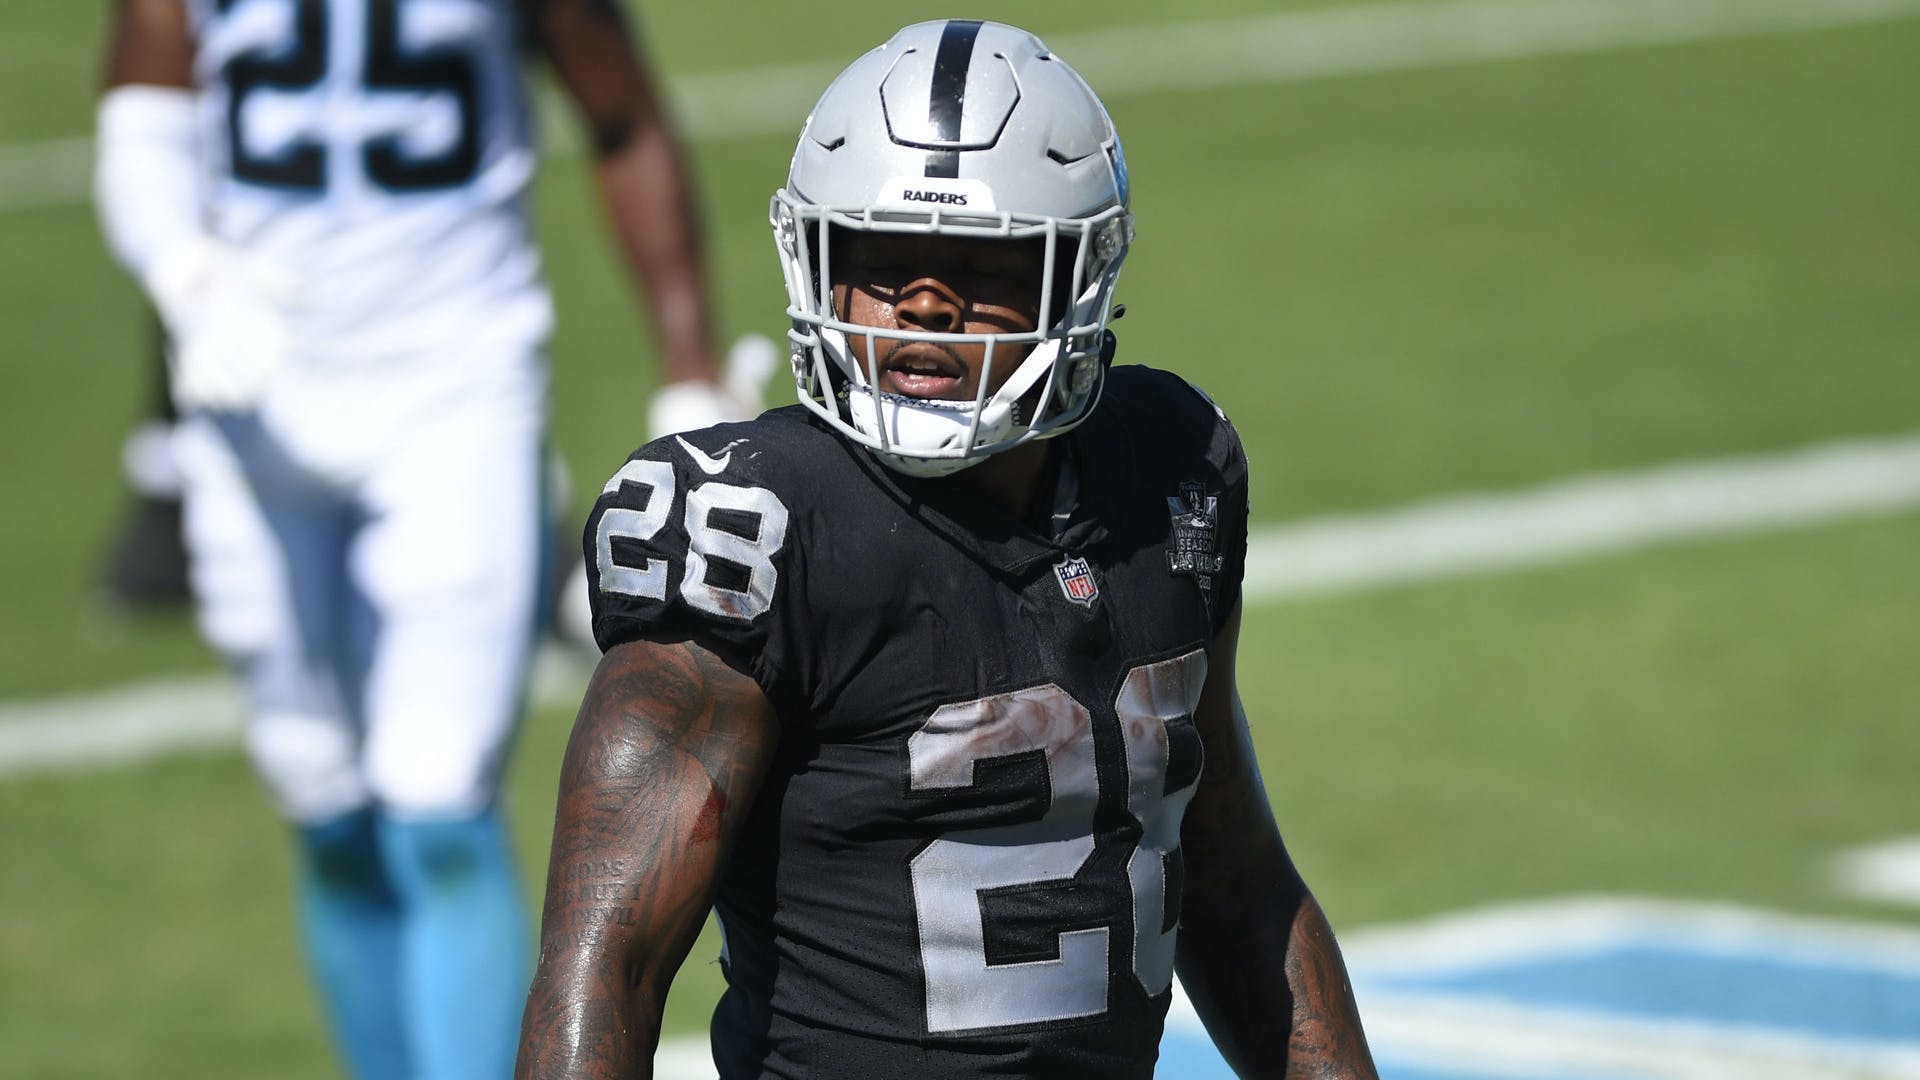 “He was always consistently playing well and so I’m glad he’s a free agent, I encourage everyone to look at him … maybe we look at him,” Payton said.